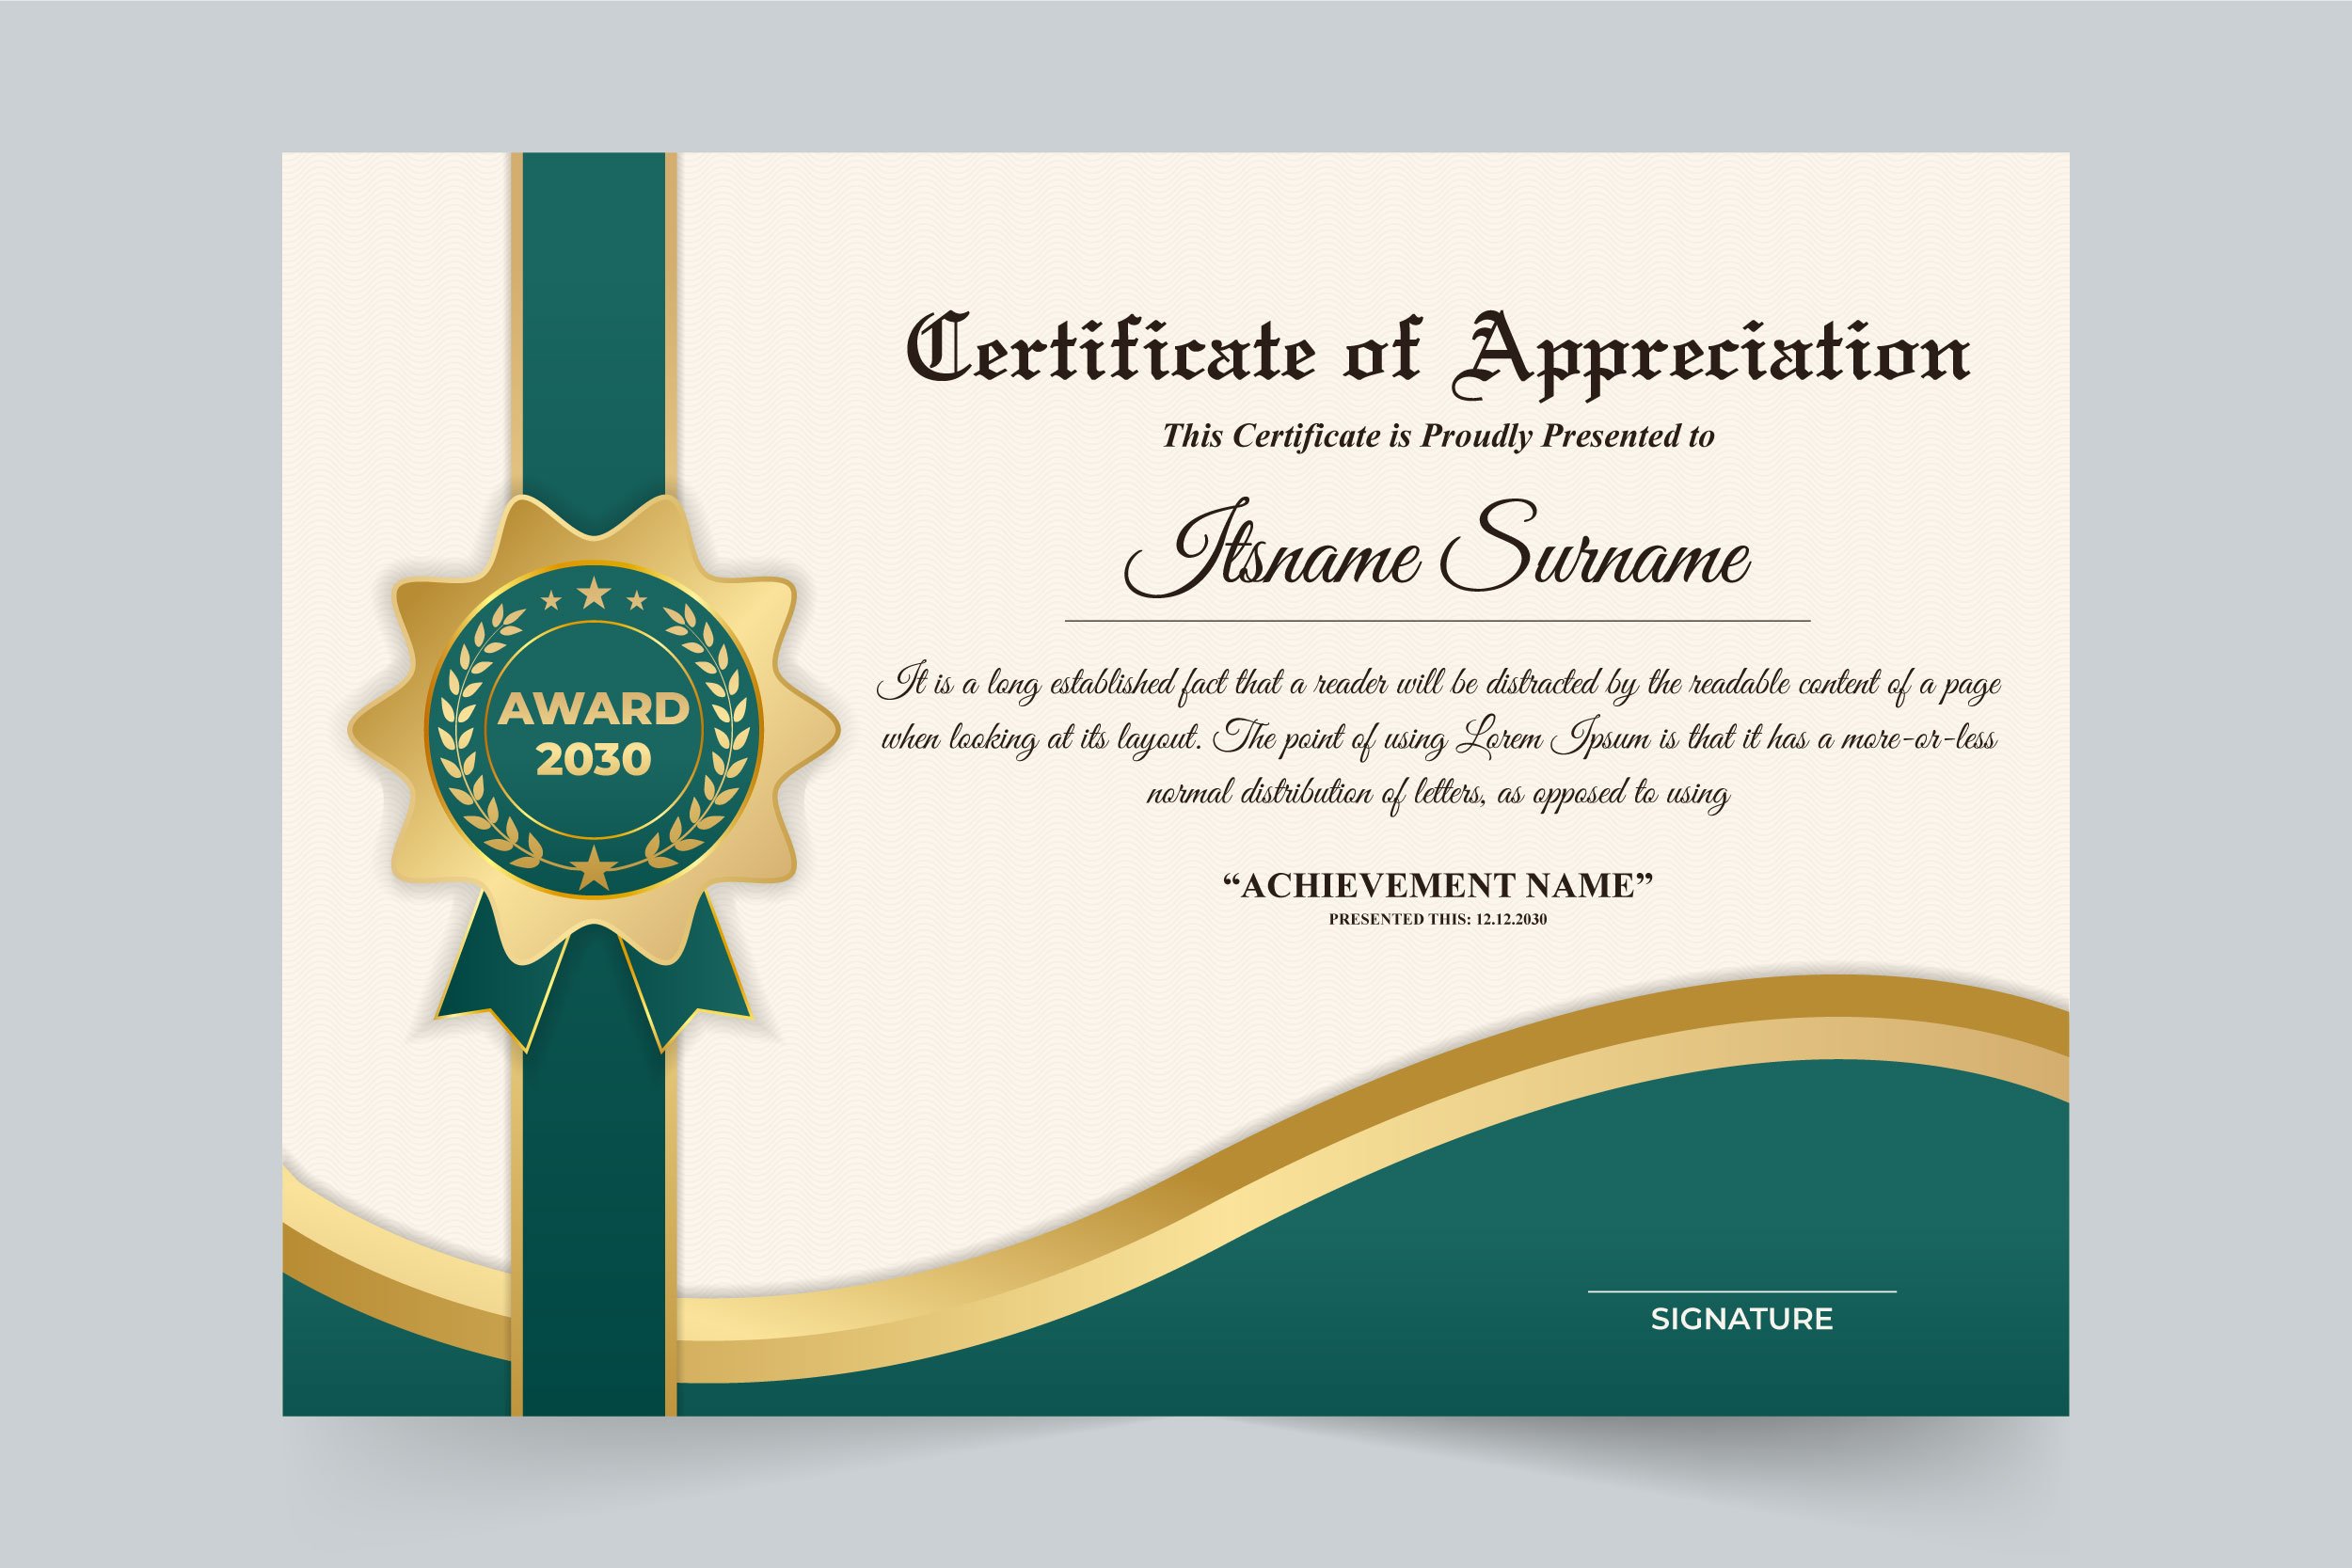 Award honor certificate template cover image.